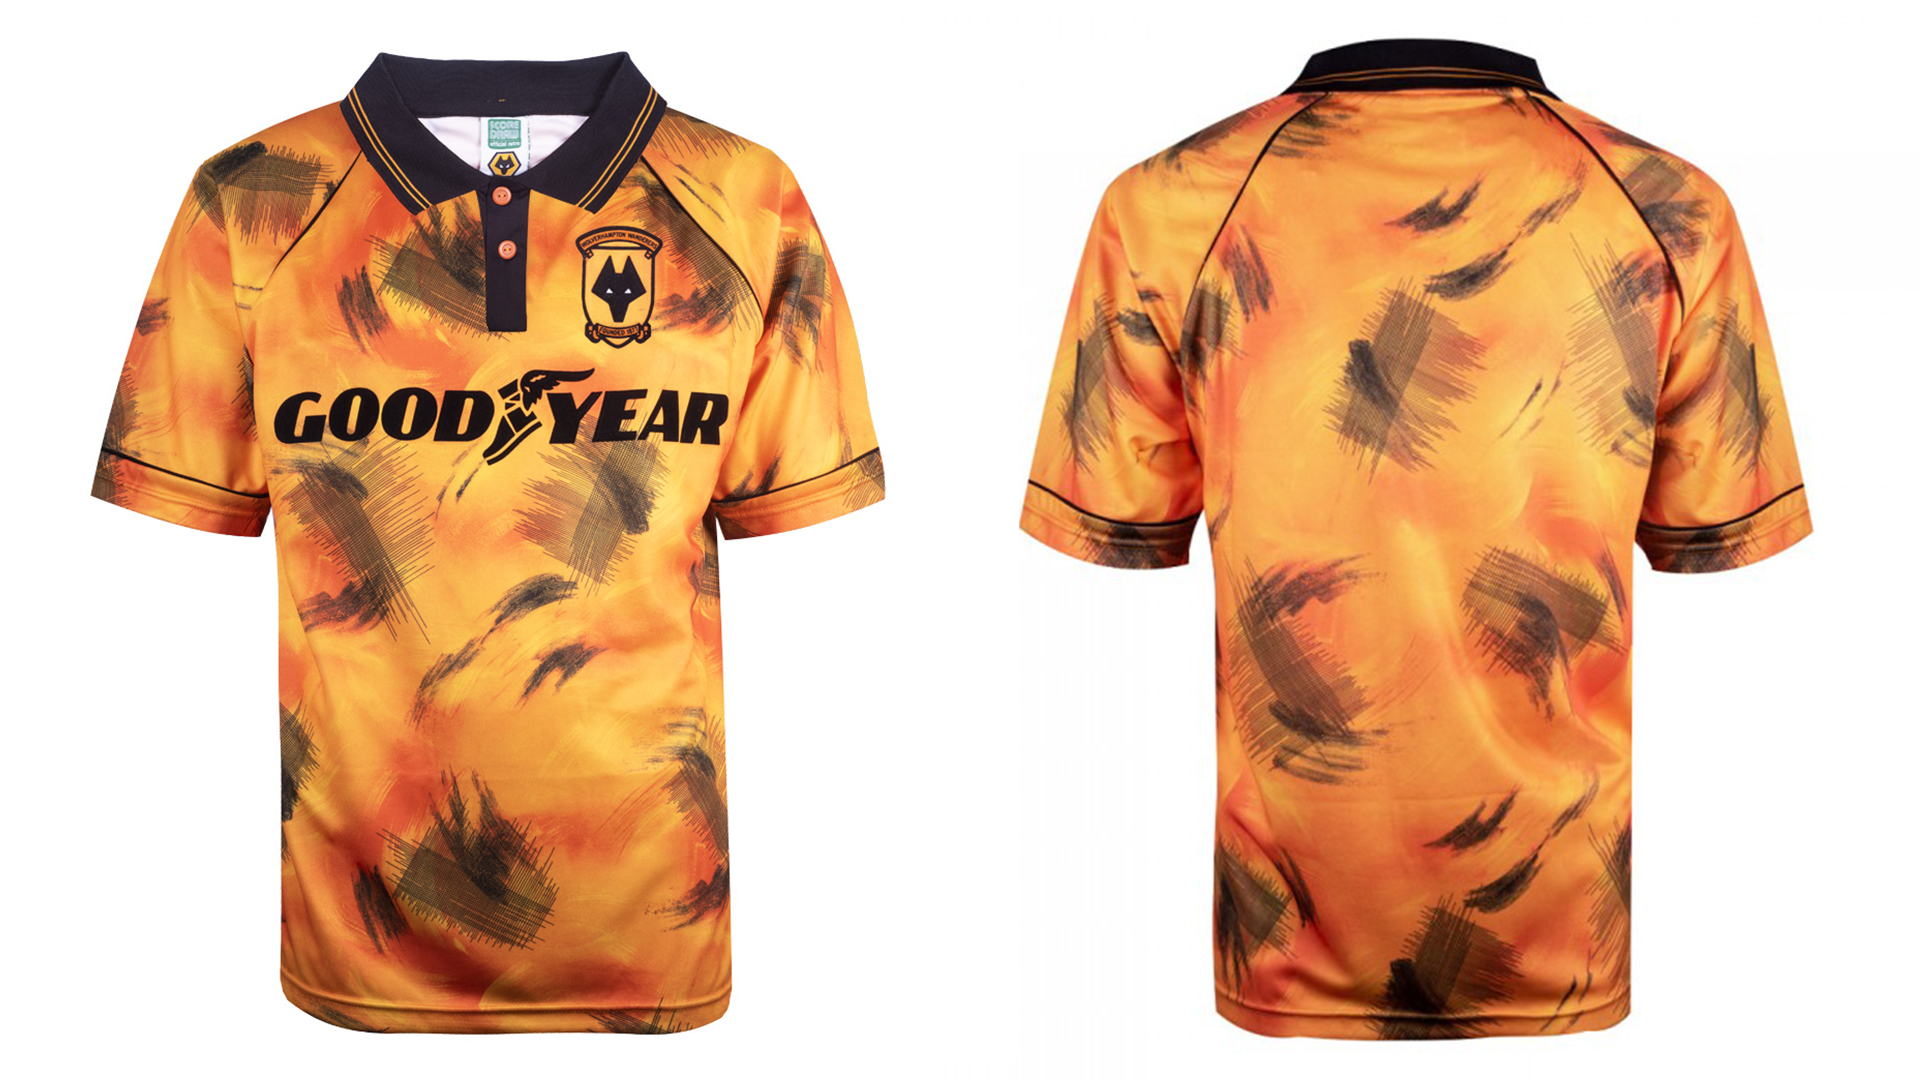 The best retro Premier League shirts you can buy from 3Retro Football